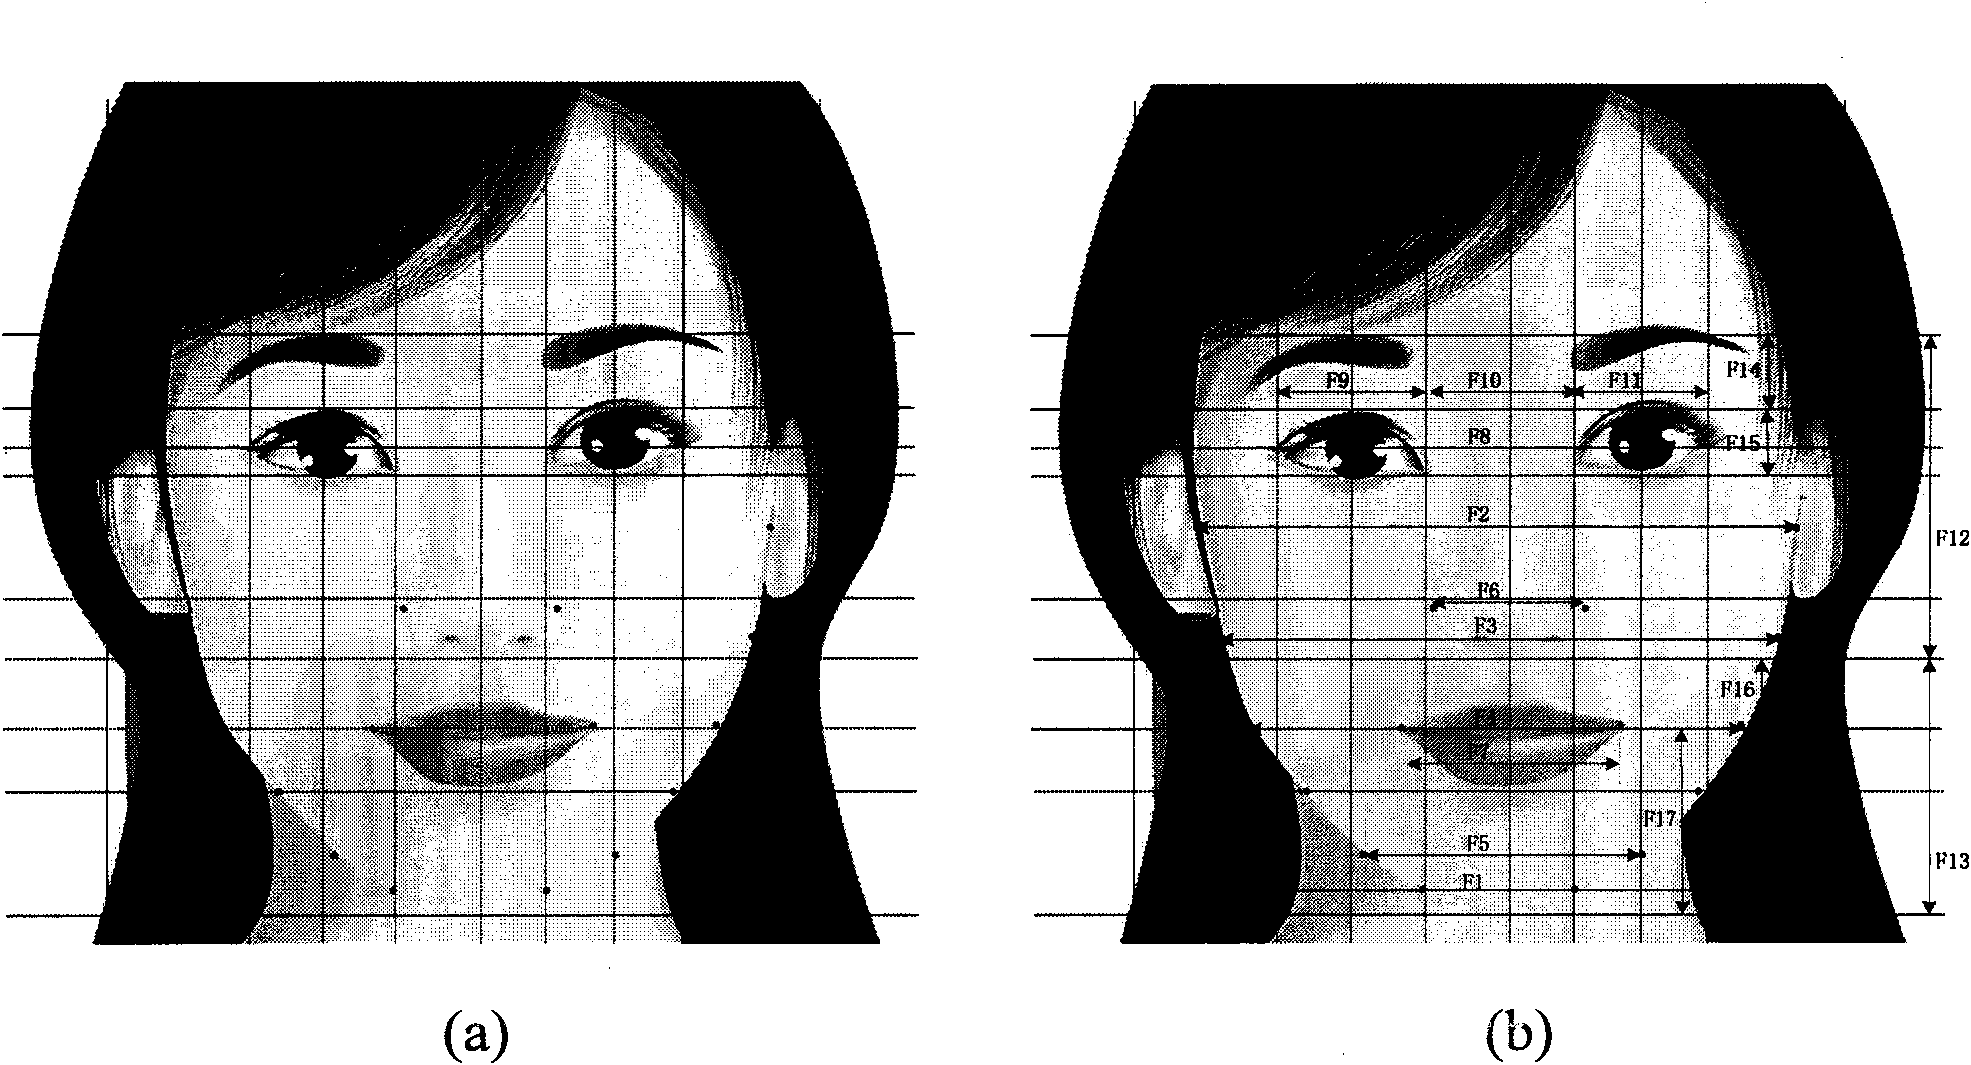 Facial beauty classification method of woman image by adopting computer